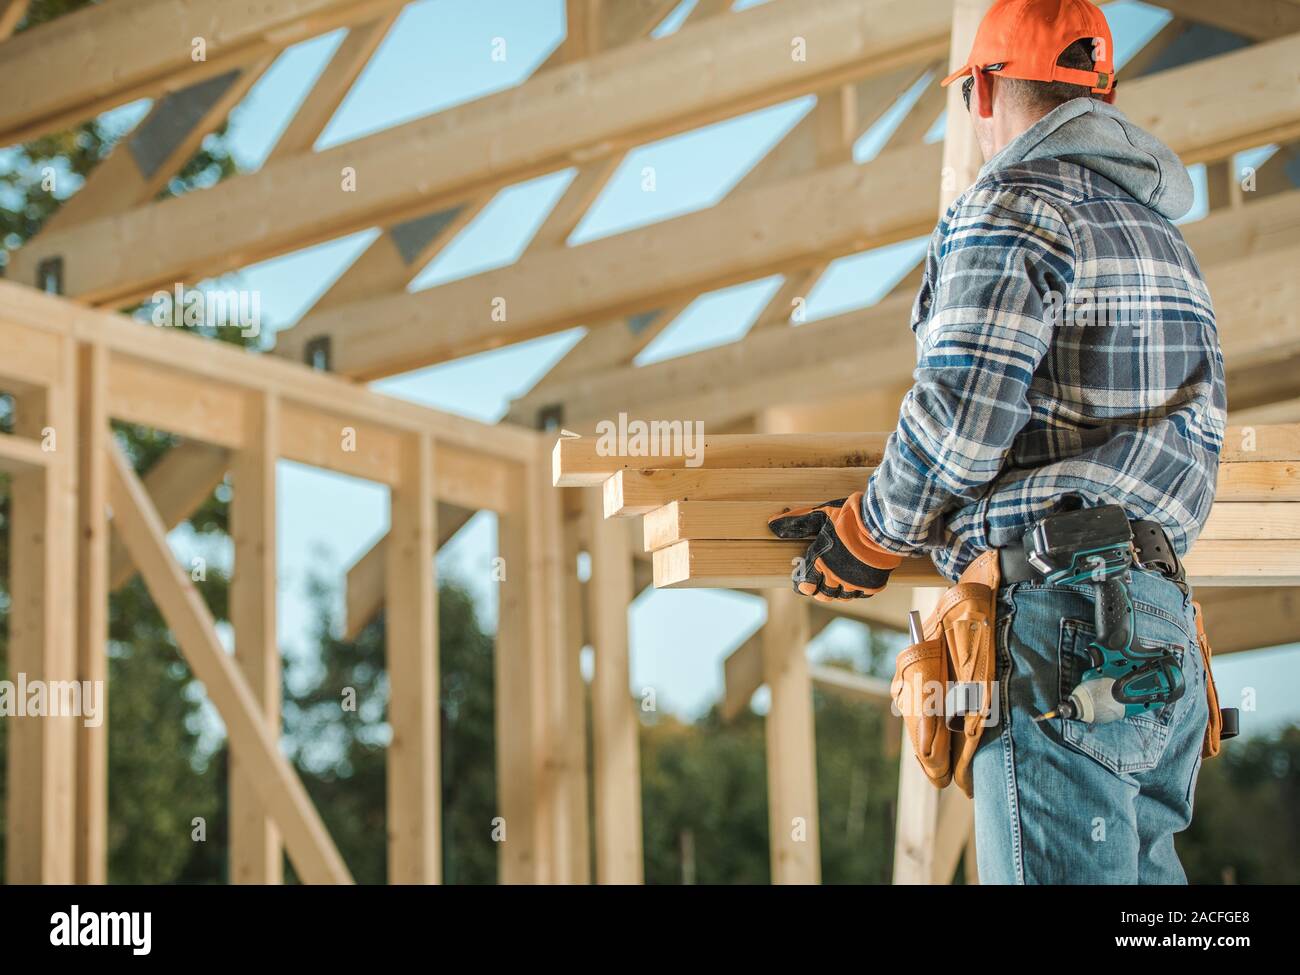 Wood House Construction Technologies. Caucasian Carpenter Contractor Worker with Wooden Elements For the Frame. Industrial Theme. Stock Photo